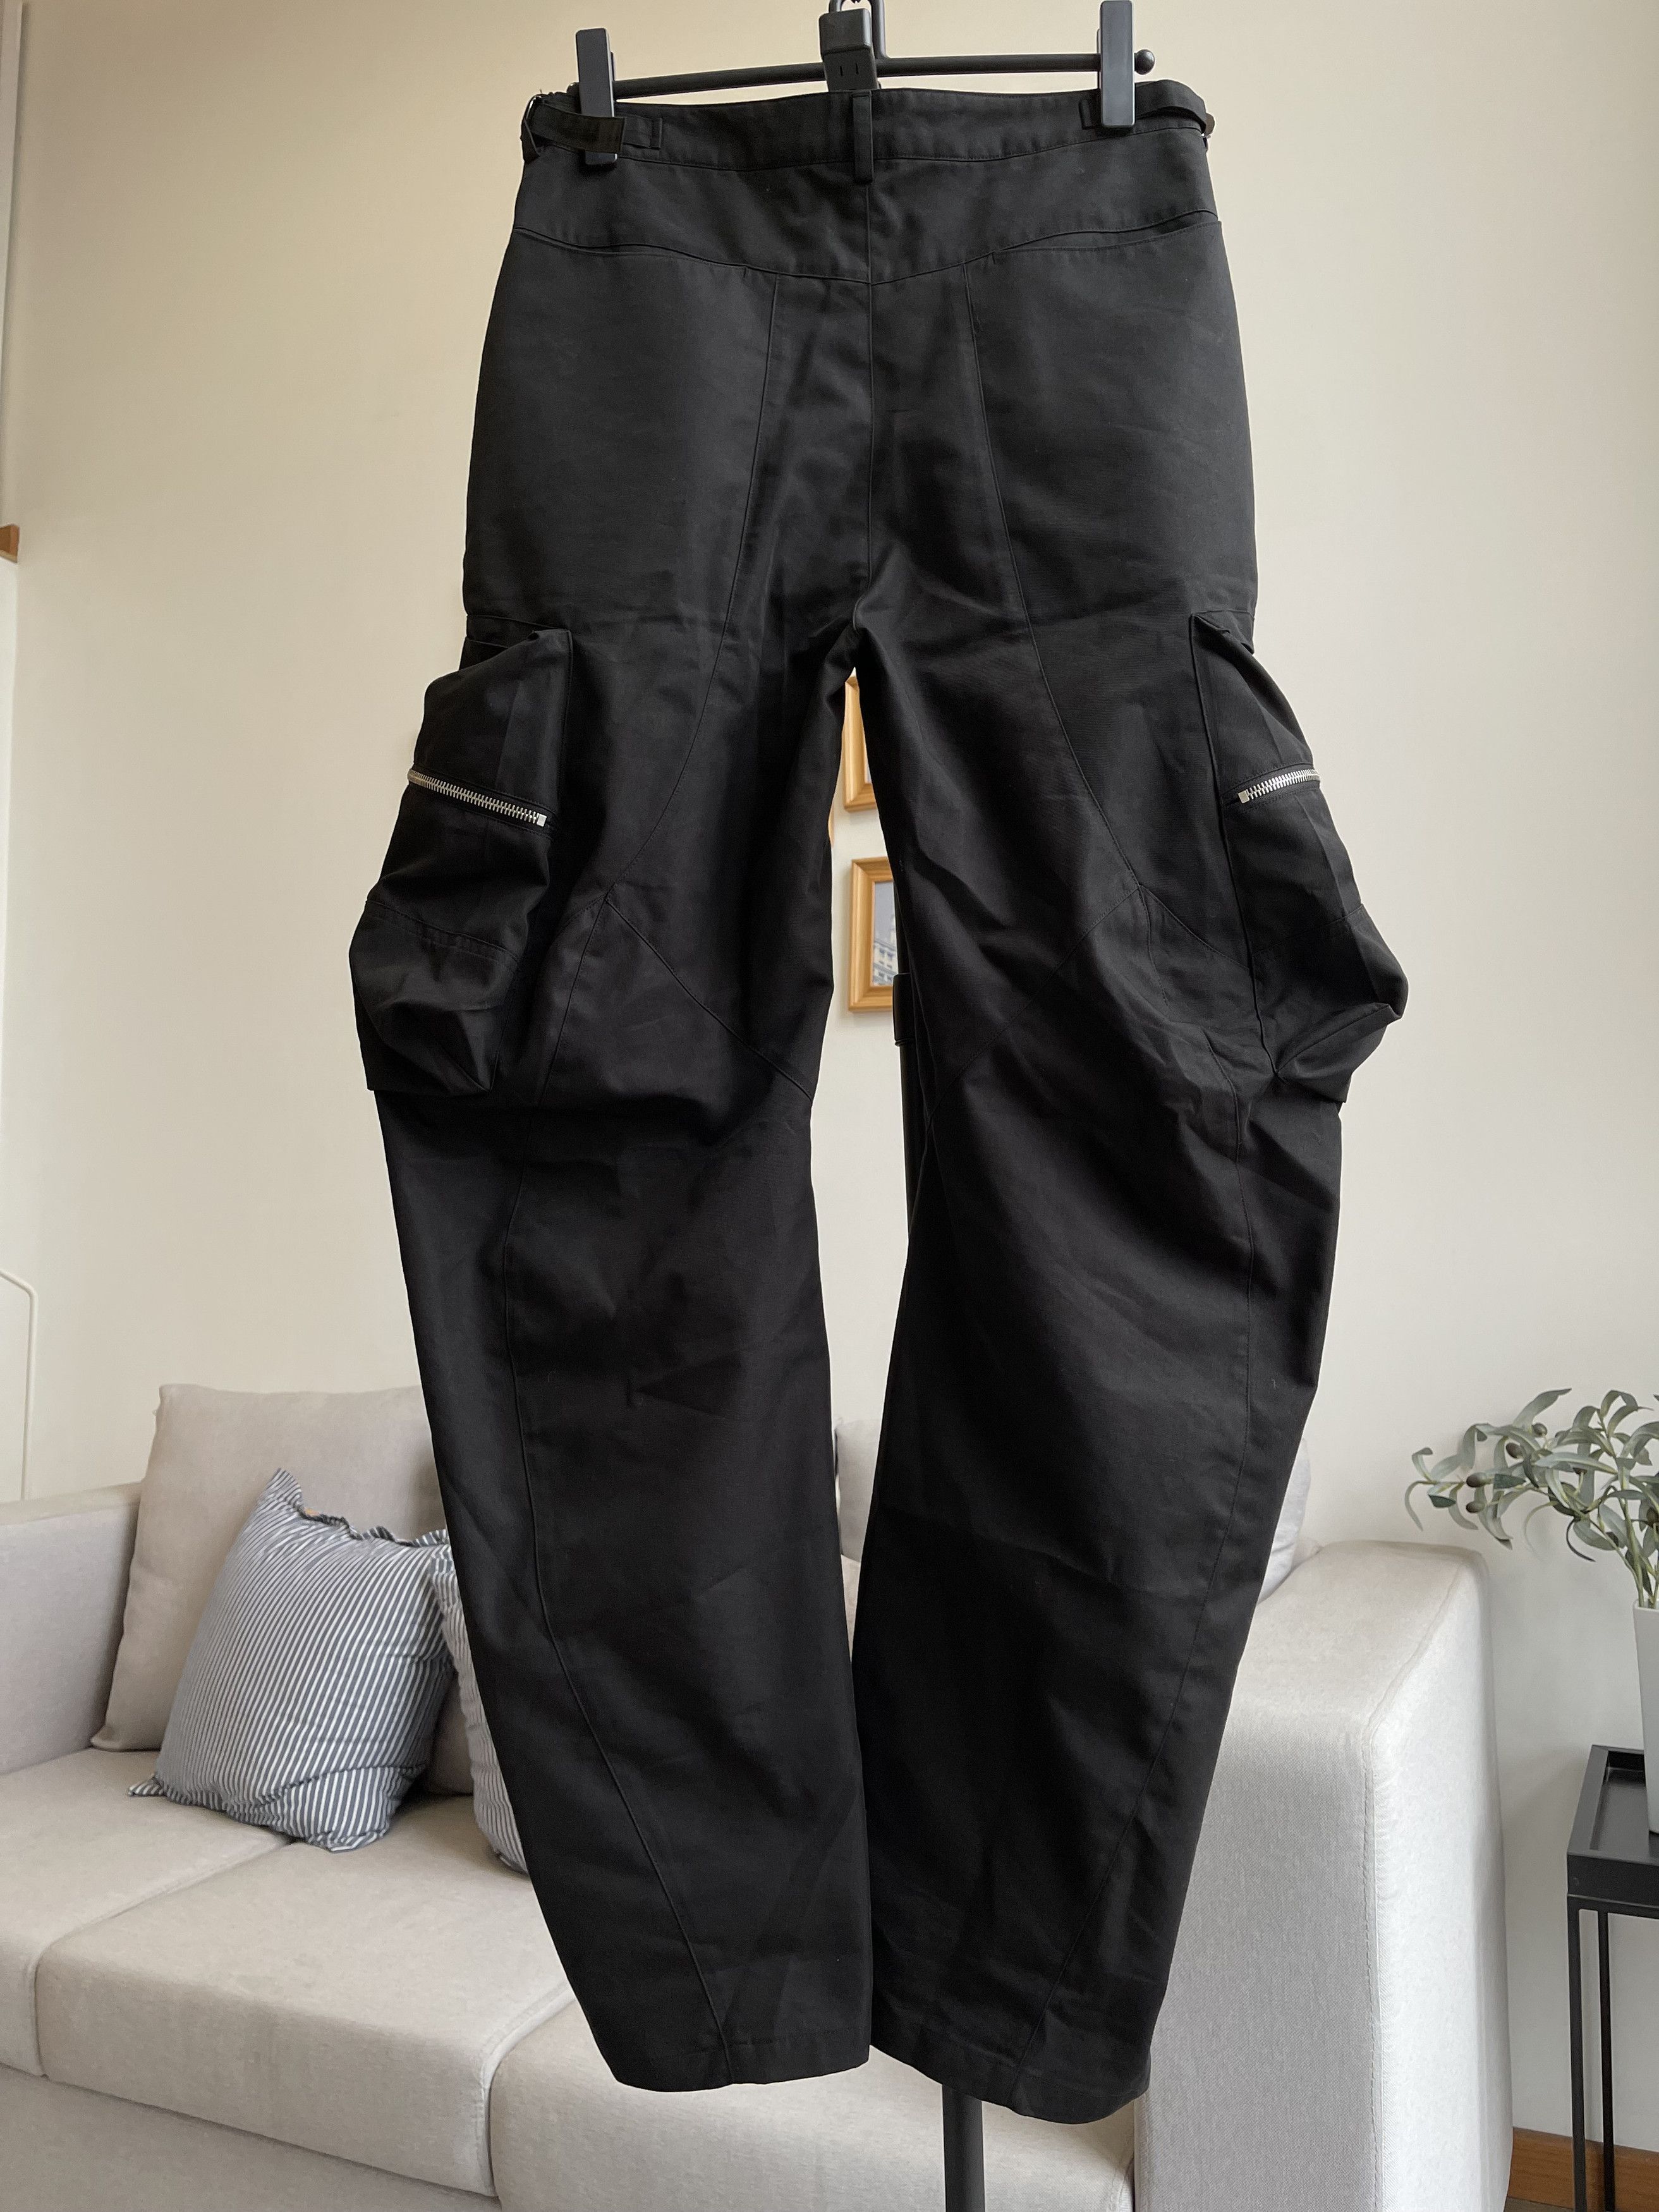 CMMAWEAR Articulated Cargo Pants | Grailed